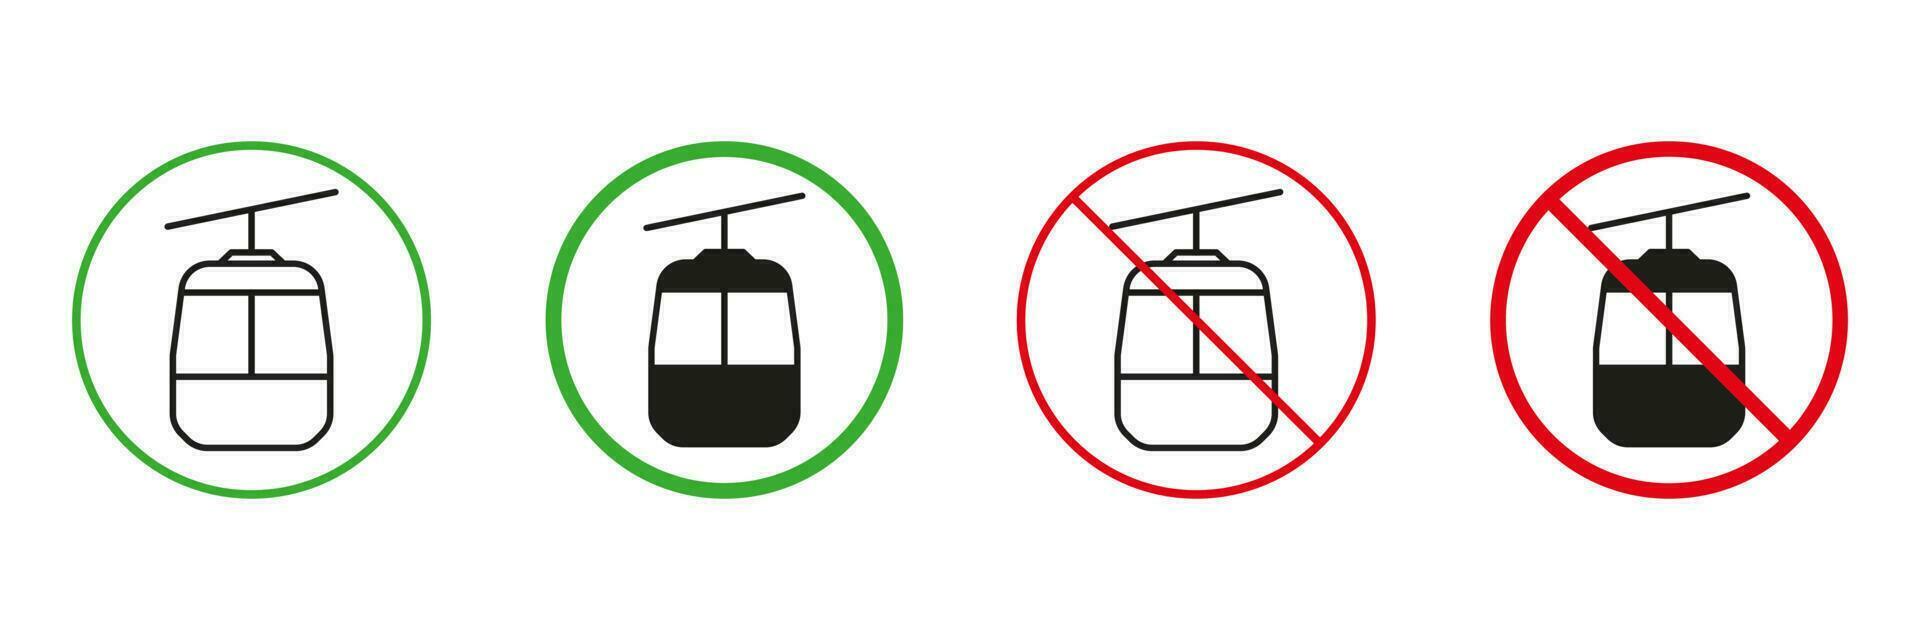 Cable Car Line and Silhouette Icons Set. Mountain Gondola Red and Green Road Signs. Permit and Not Allowed Cableway Transportation Symbol Collection. Isolated Vector Illustration.